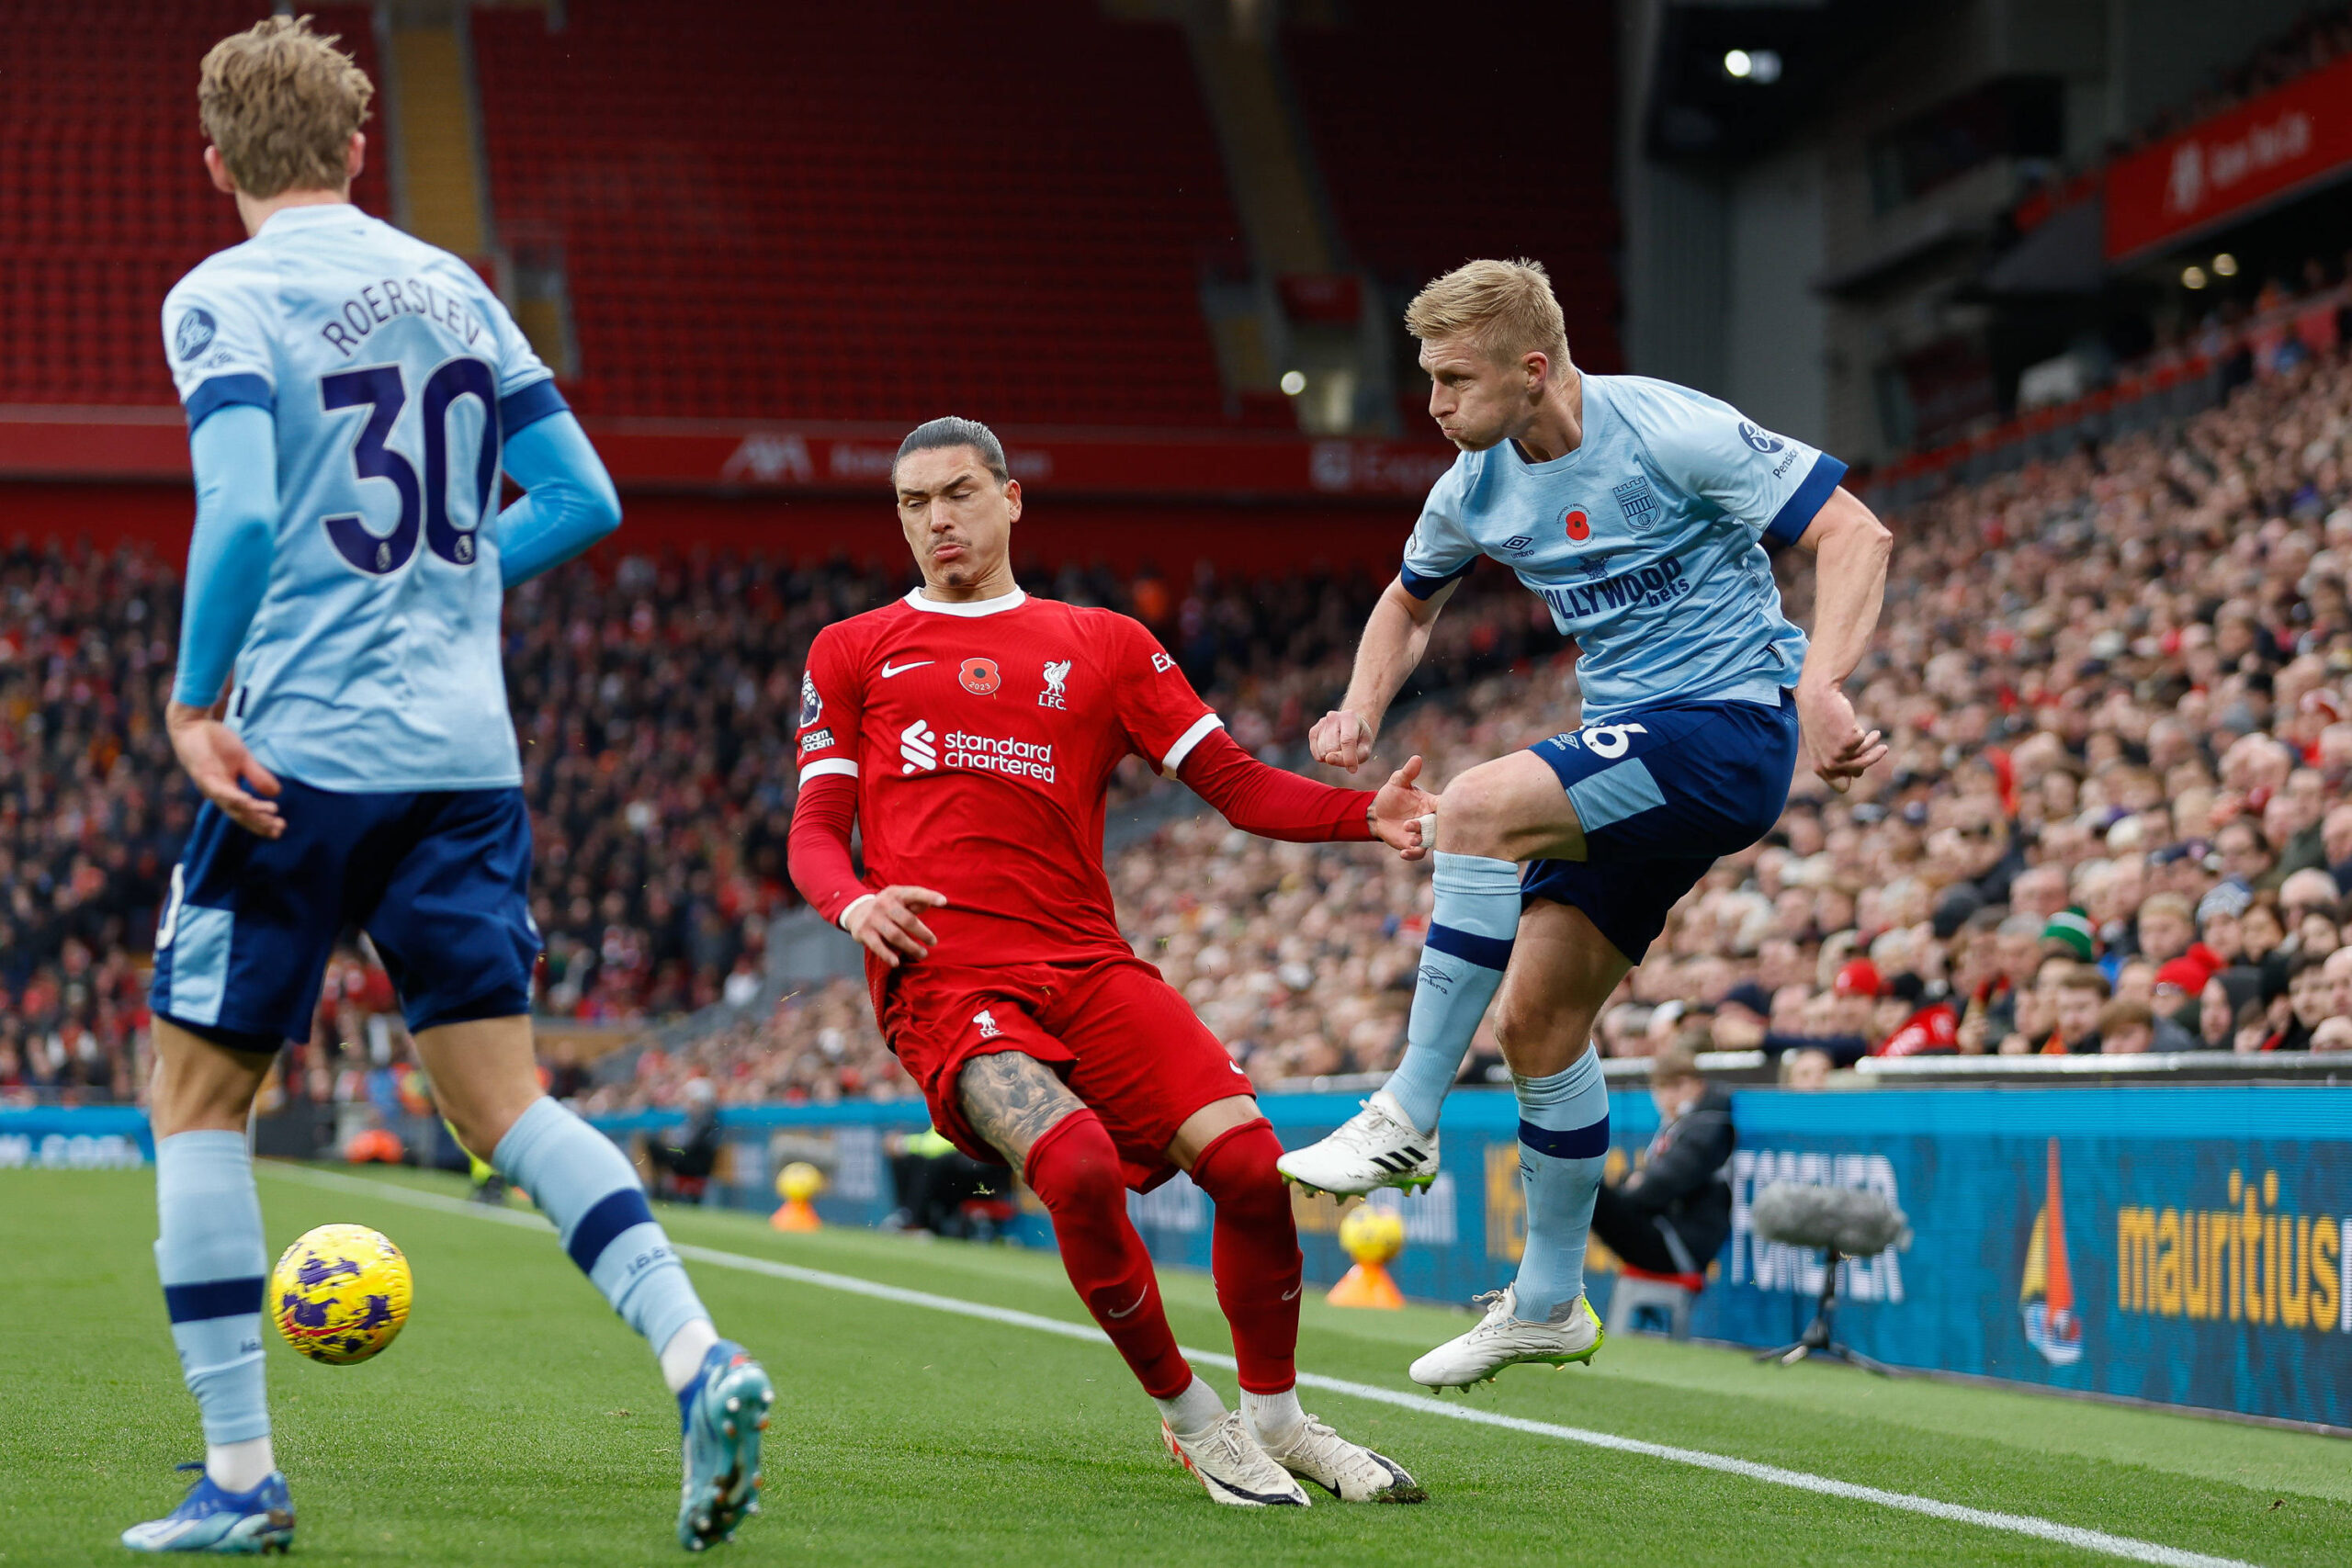 Ben Mee of Brentford clears the ball despite being closed down by Darwin Nunezs of Liverpool